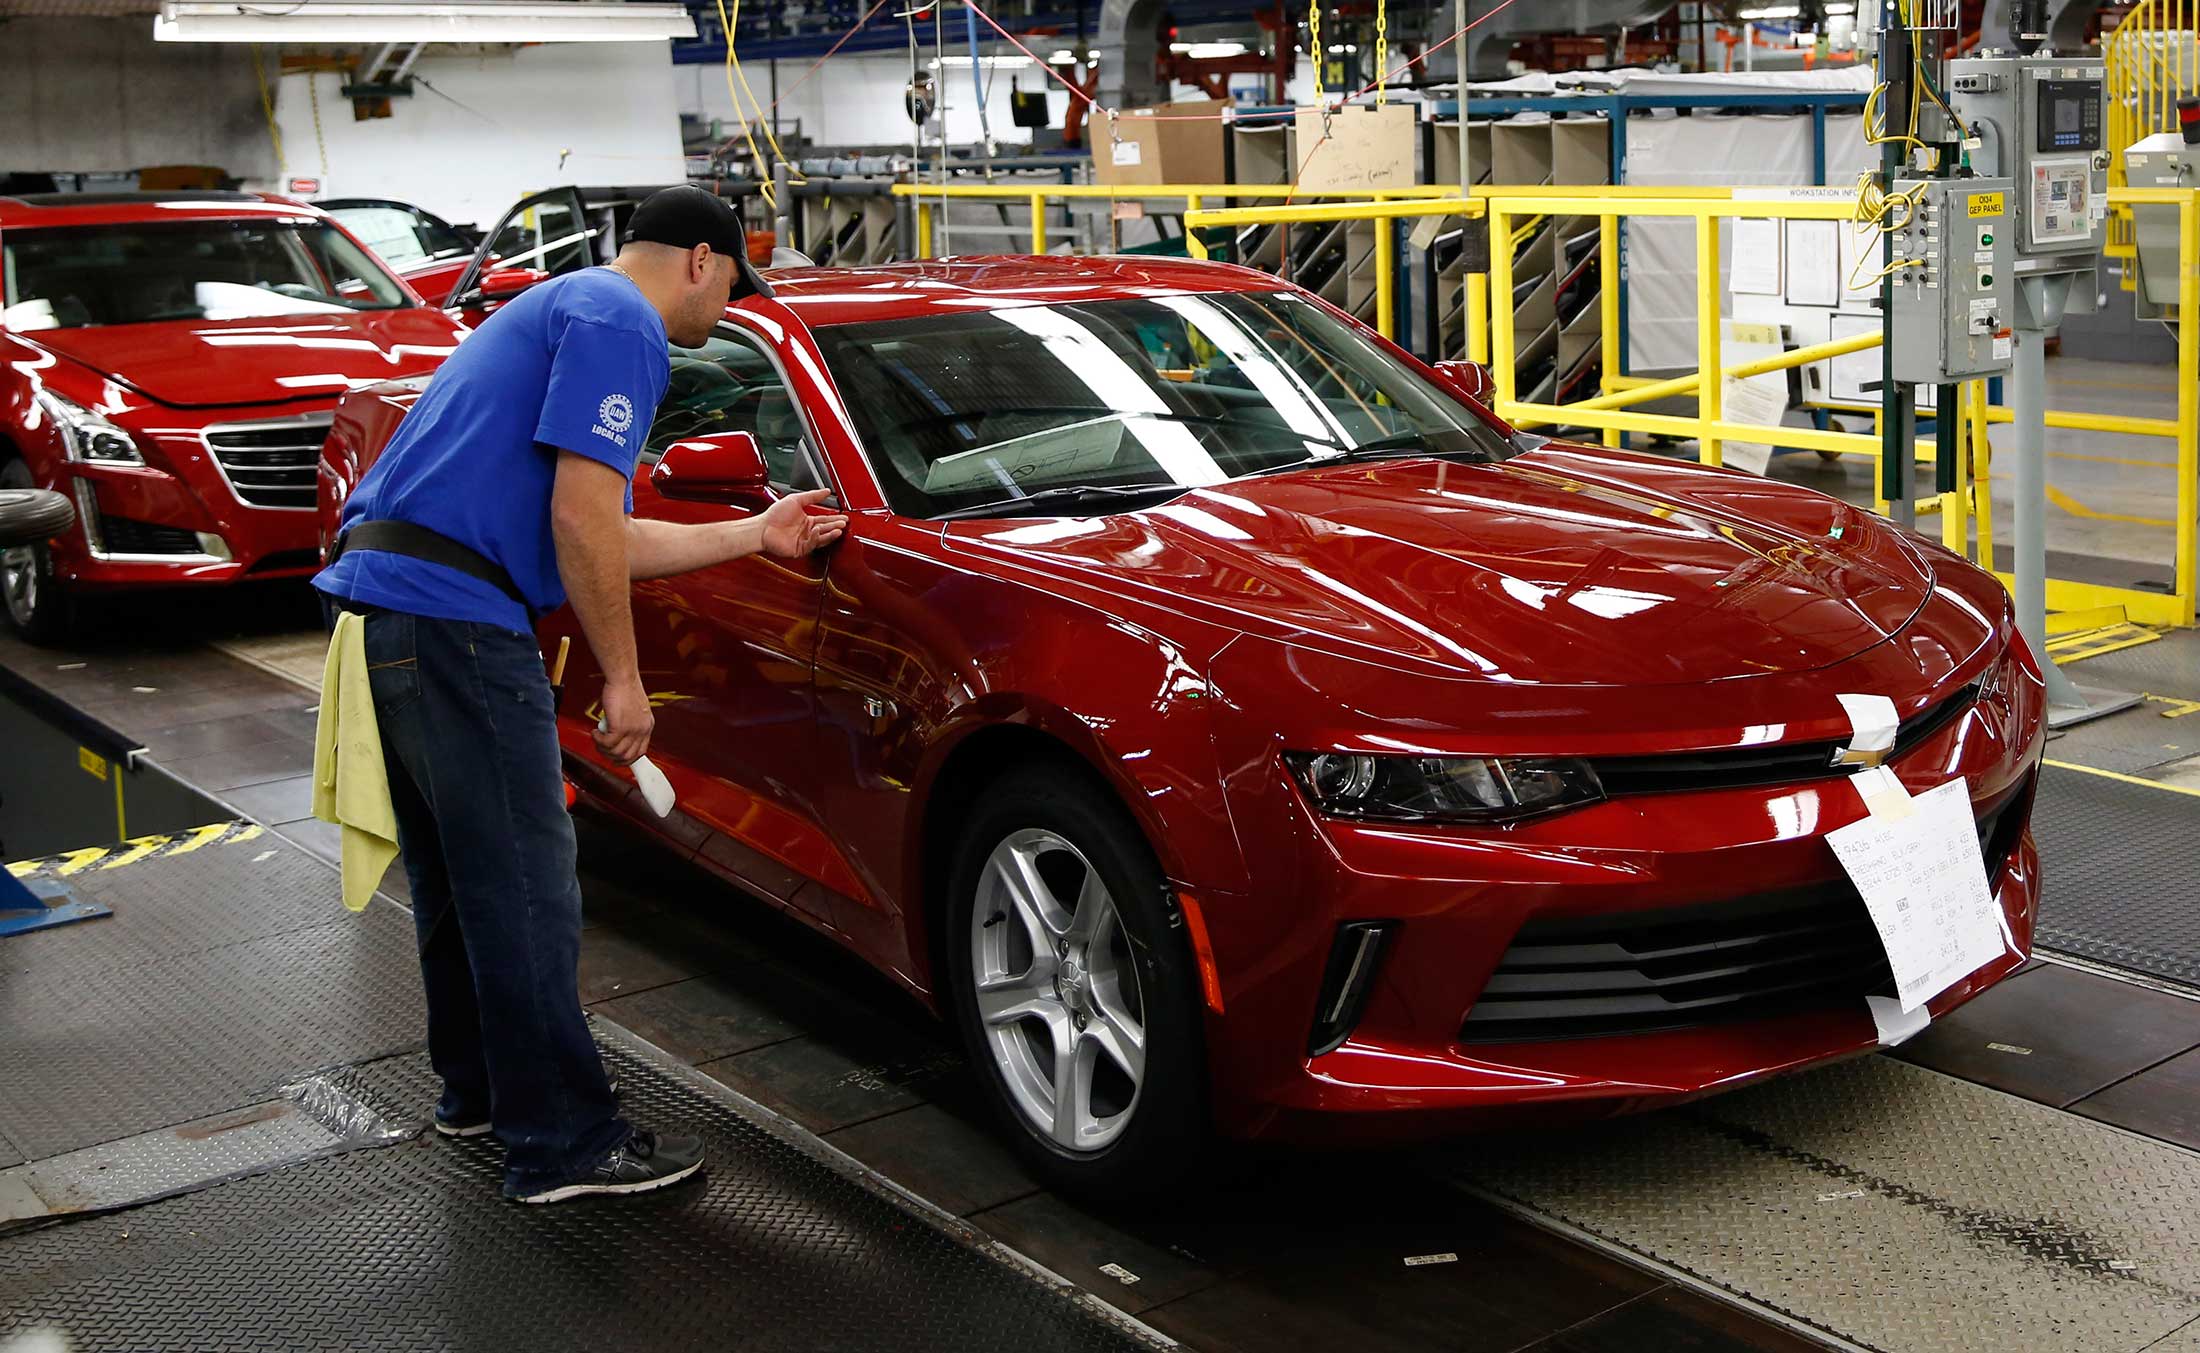 Auto Sales Slow as U.S. Eases From Peak to 'Pretty Good' Market